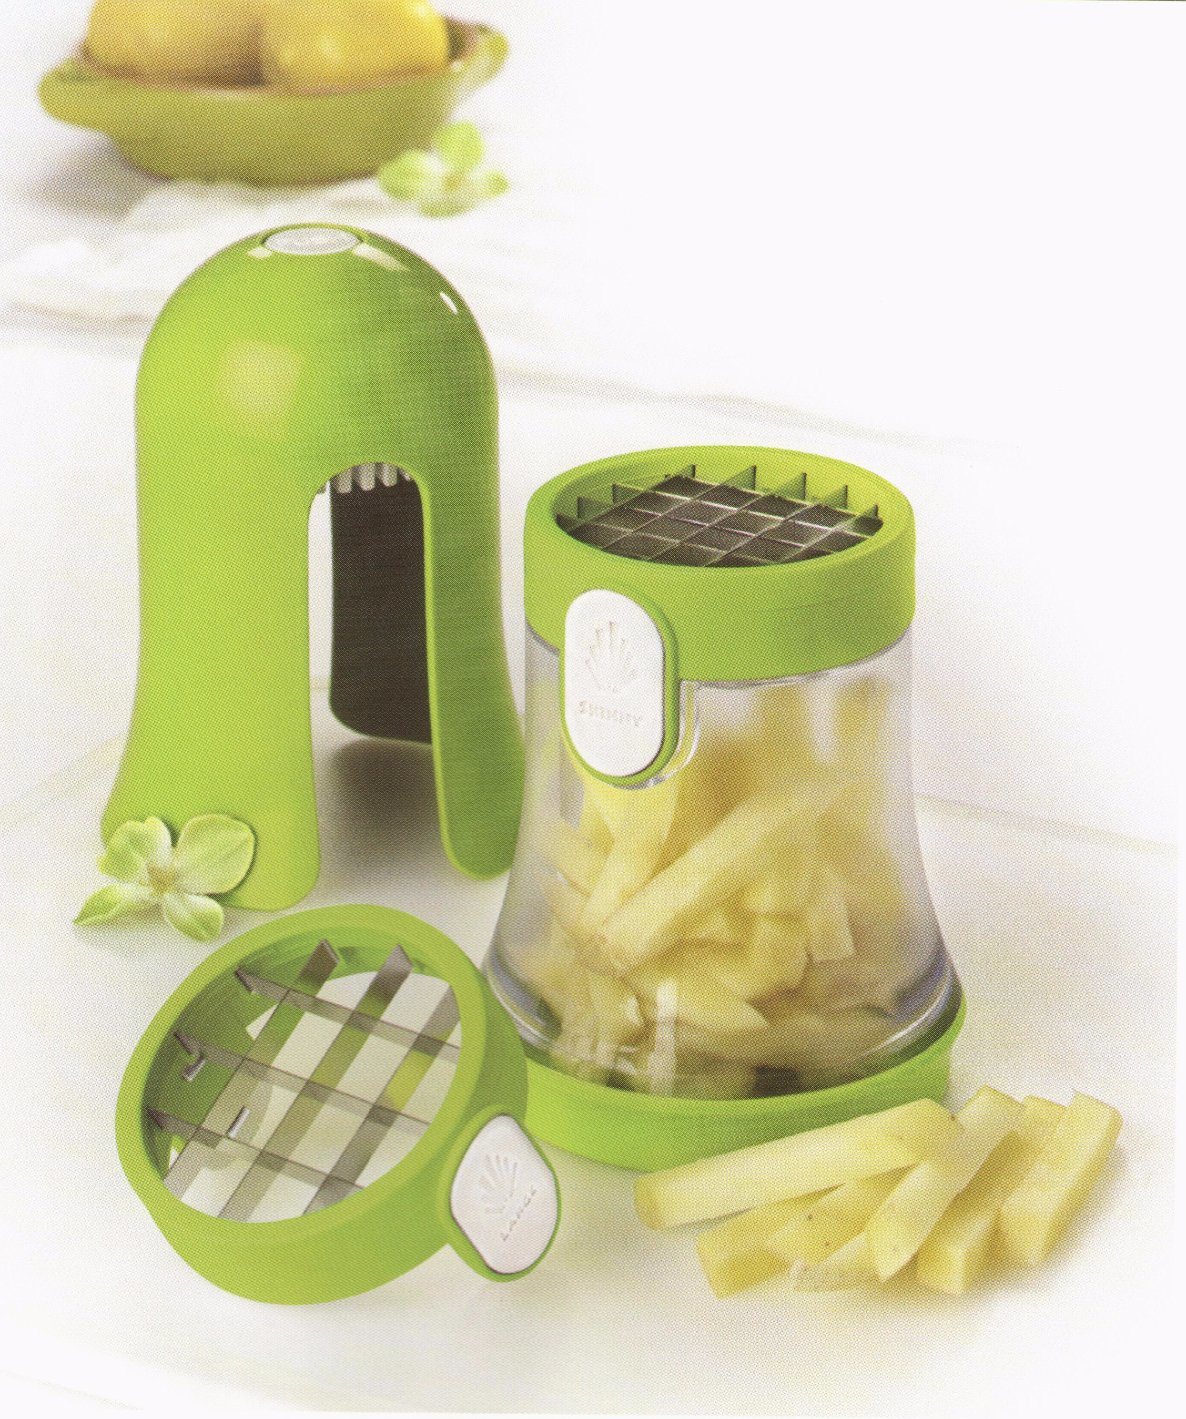 Wholesale Price China Manual Vegetable Chopper -
 2 in 1 Fashion Home Appliance Plastic Vegetable Cutting Food Chopper Dice and Slice Machine Cg074 – Long Prosper